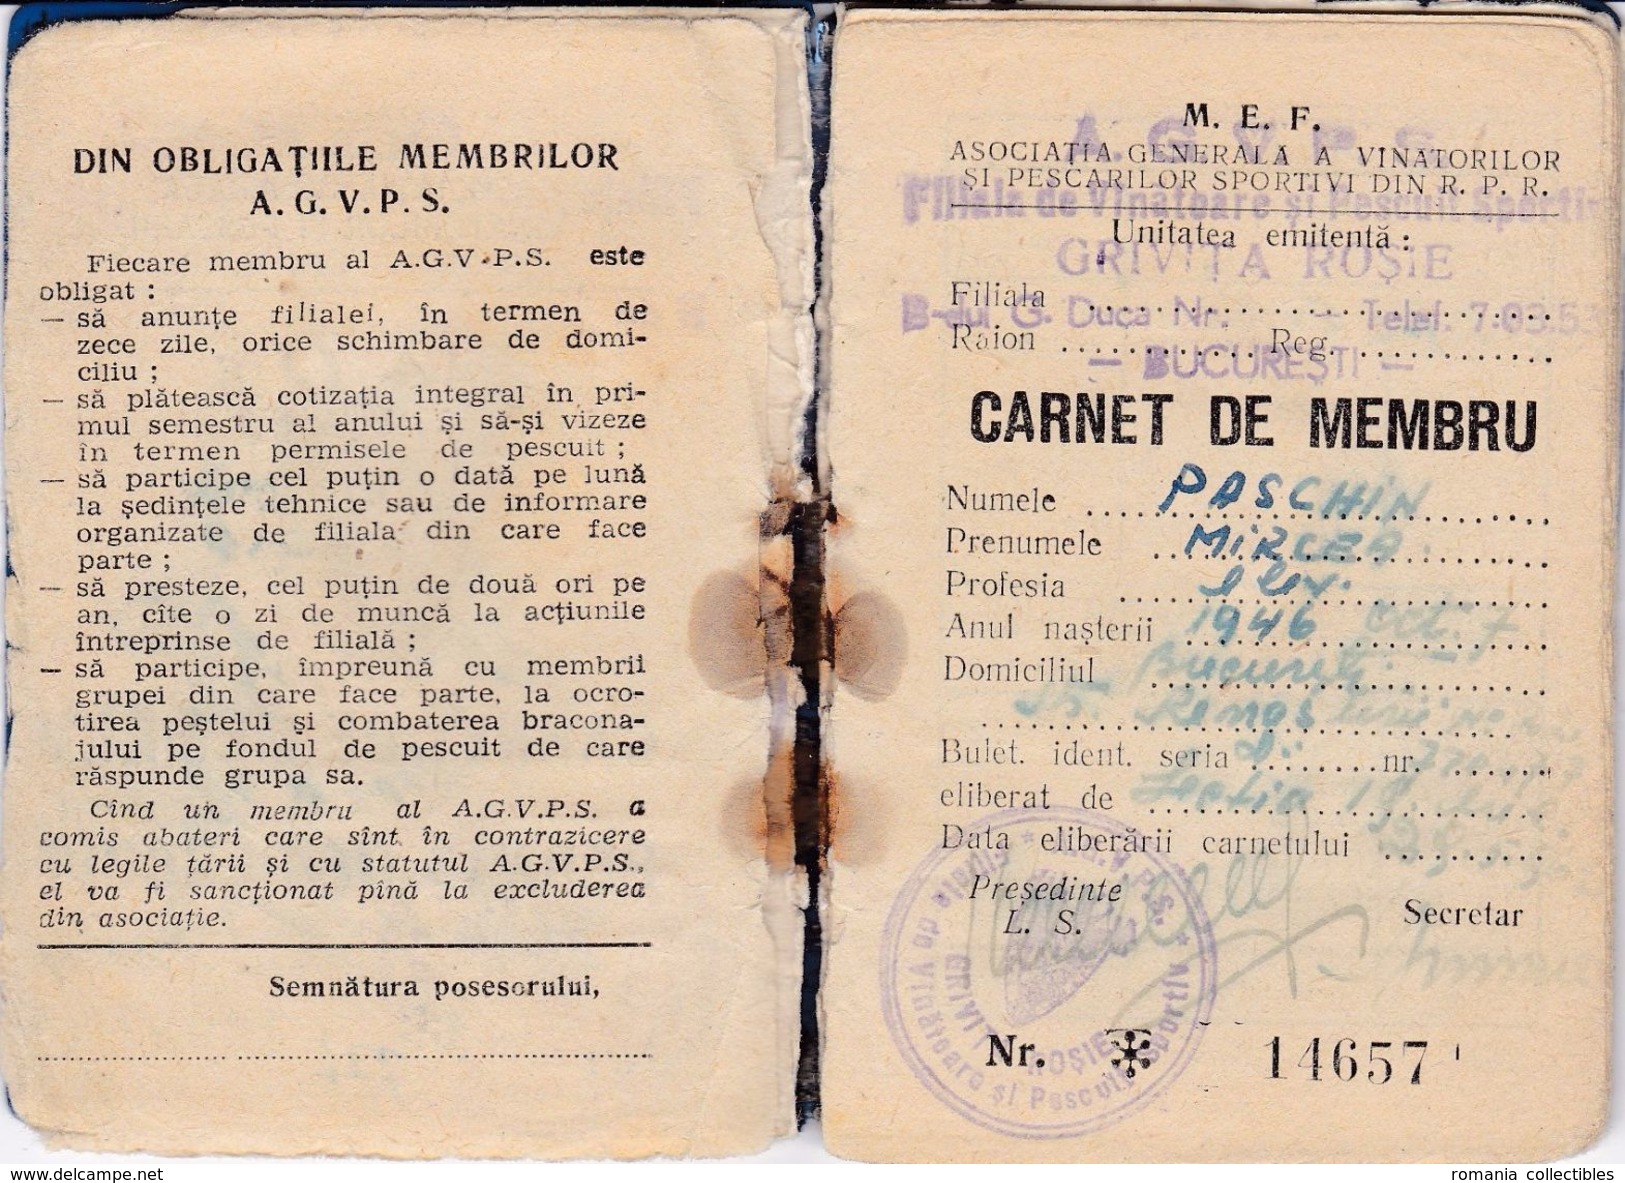 Romania, 1956, Fishing Permit / Member Card AGVPS - Revenue Fiscal Stamp / Cinderella - Historical Documents